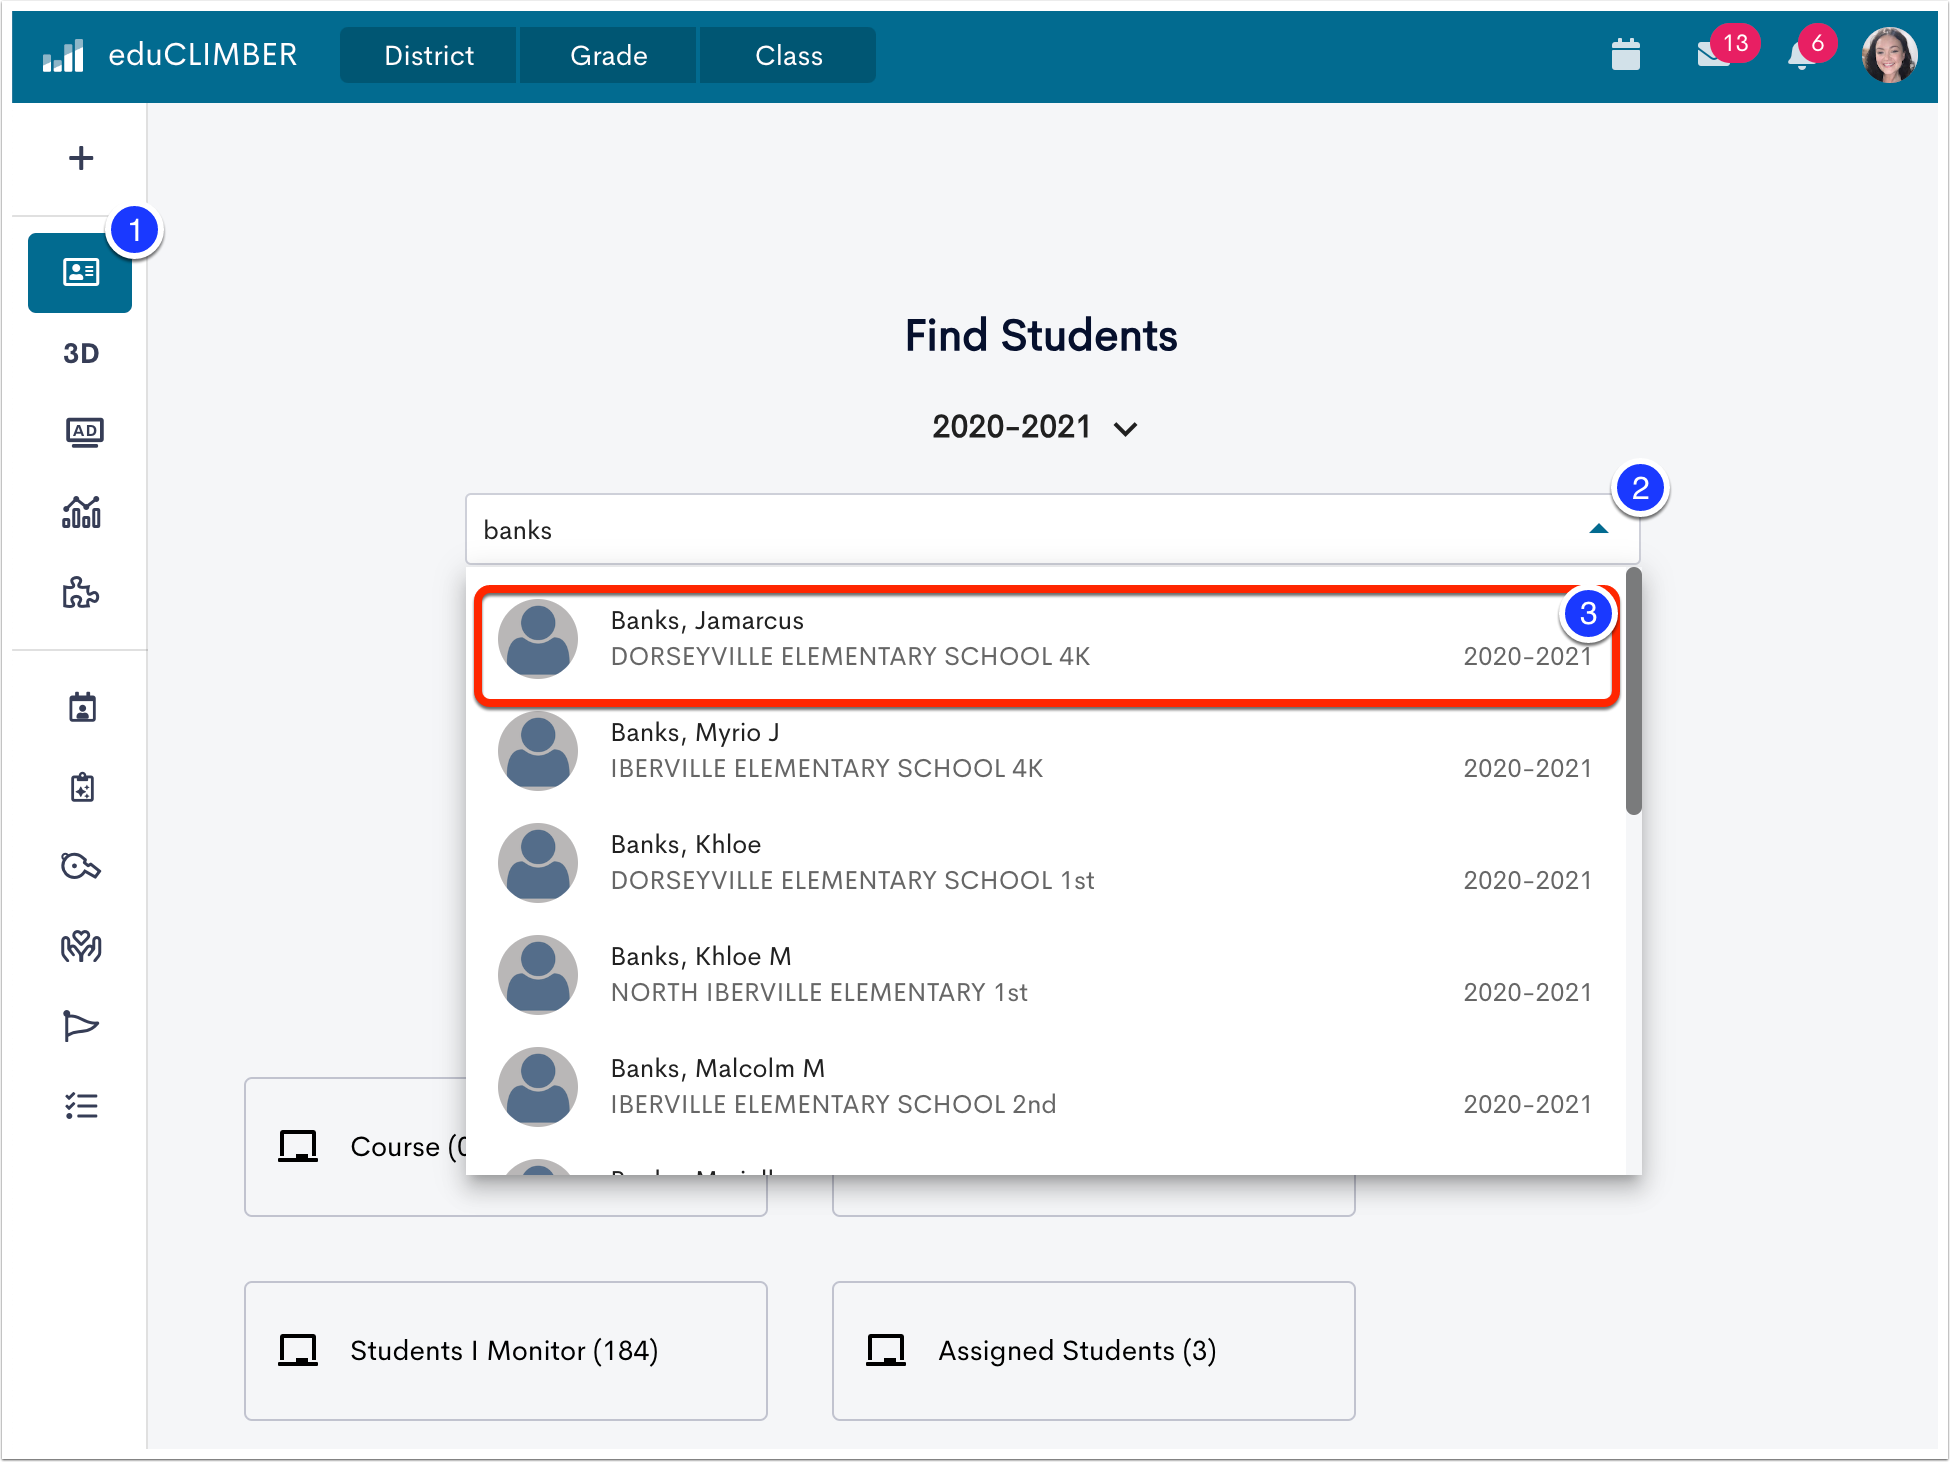 Image of find students page with the student profile button marked as step 1, text box to enter a student name marked as step 2, and selecting a student marked as step 3